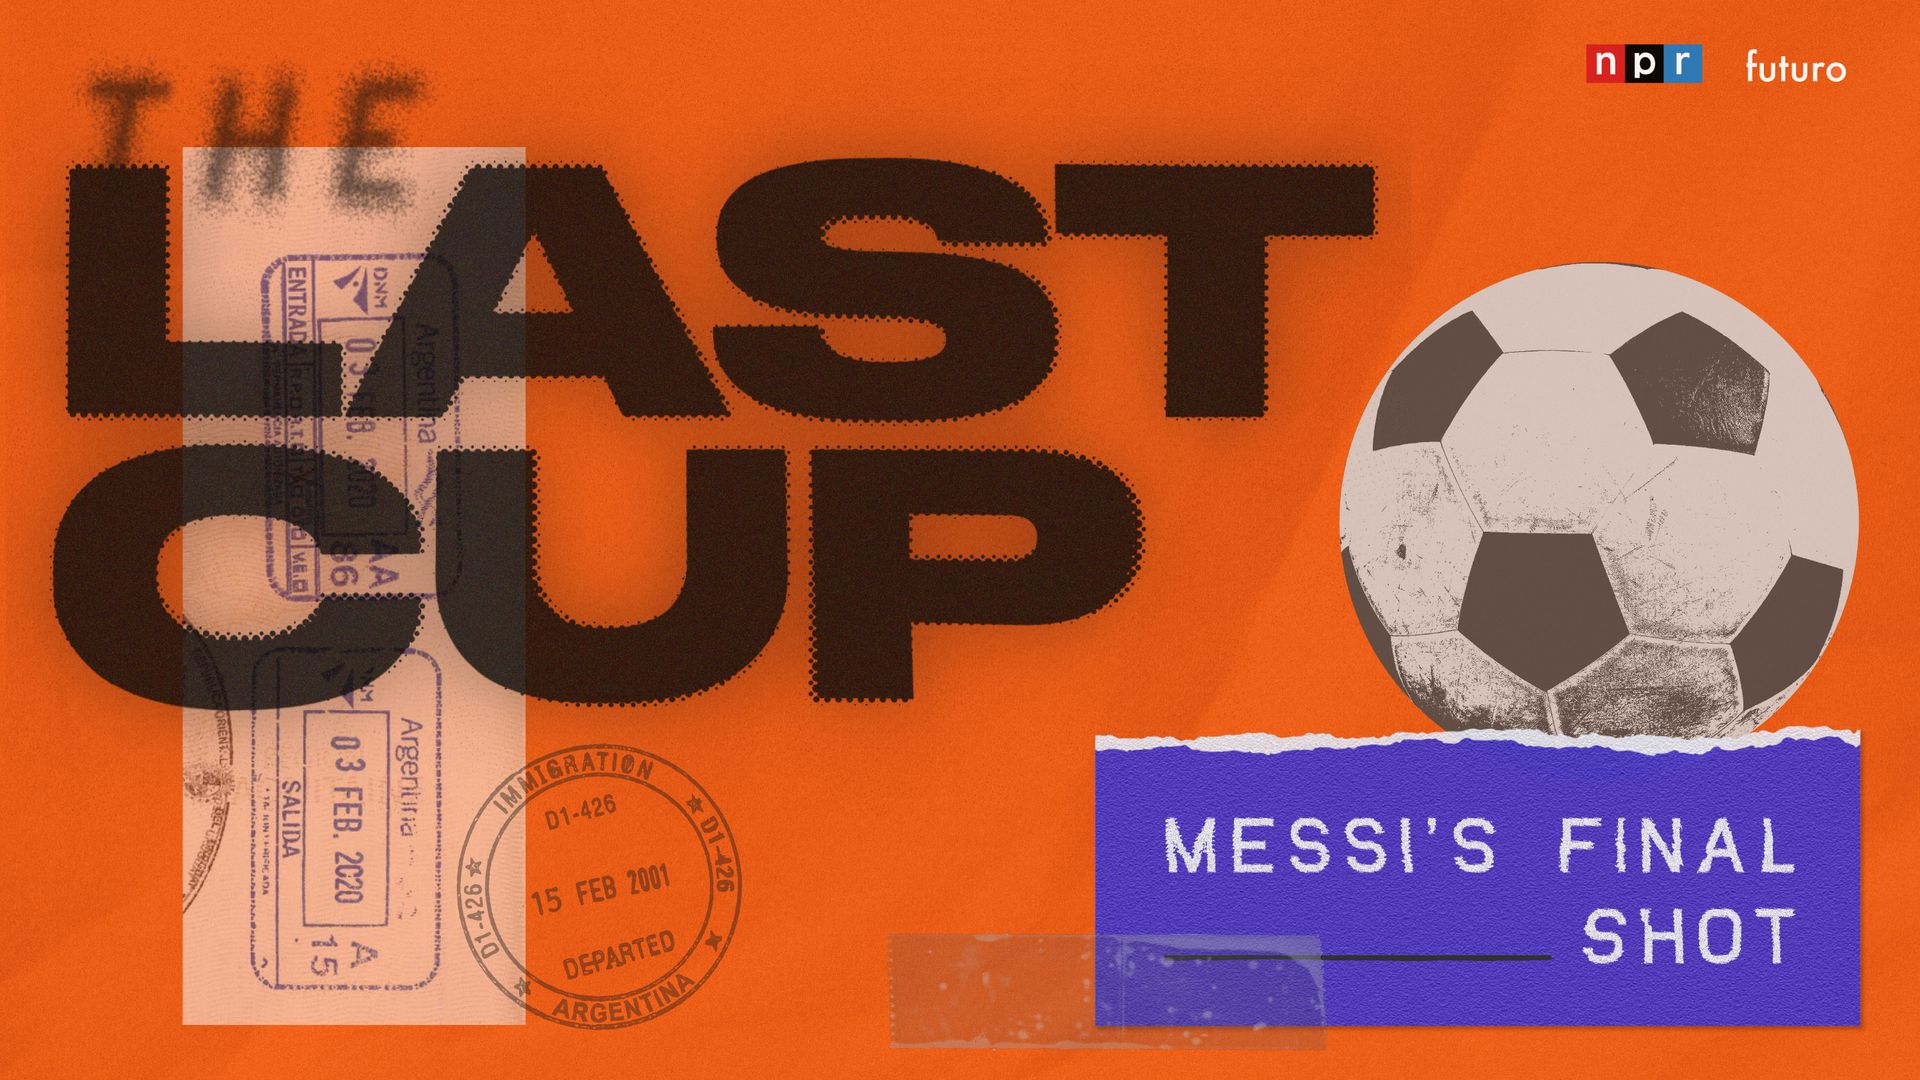 An image of a new podcast called "The Last Cup: Messi's Final Shot" with an orange background and a soccer ball 